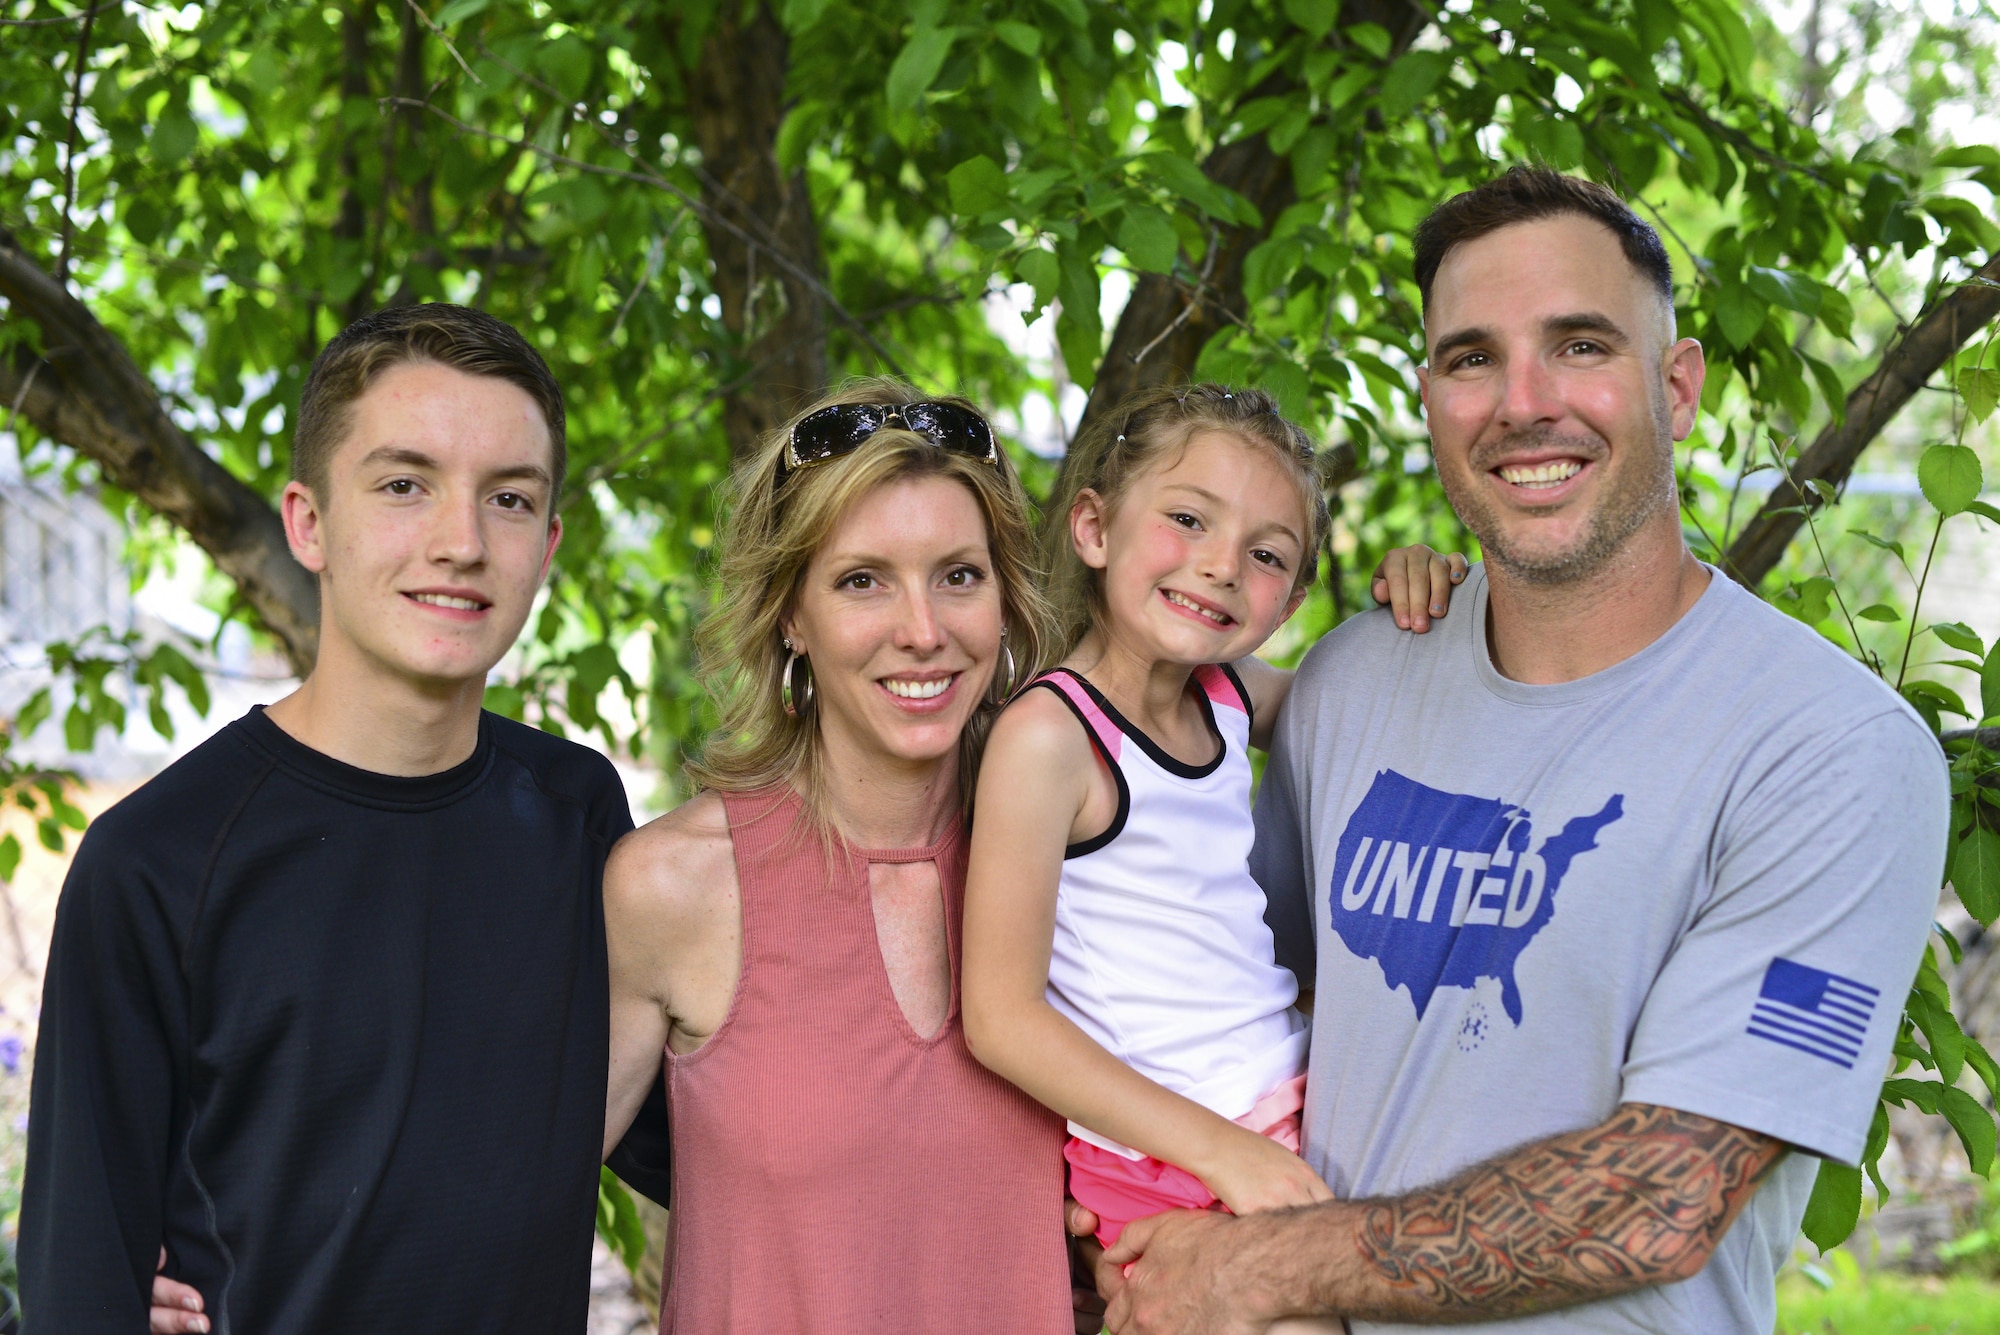 Tech. Sgt. Christopher D’Angelo, right, a 490th Missile Squadron missile alert facility manager at Malmstrom Air Force Base, Mont., poses for a photo with his wife, Chanda, son, Jace and daughter, Brittyn at their home in Great Falls, Mont., June 7, 2017. D’Angelo was diagnosed with post-traumatic stress disorder after he was injured by an improvised explosive device Jan. 15, 2008. He said his wife has been very supportive with helping him cope with his PTSD. (U.S. Air Force photo/Master Sgt. Chad Thompson)